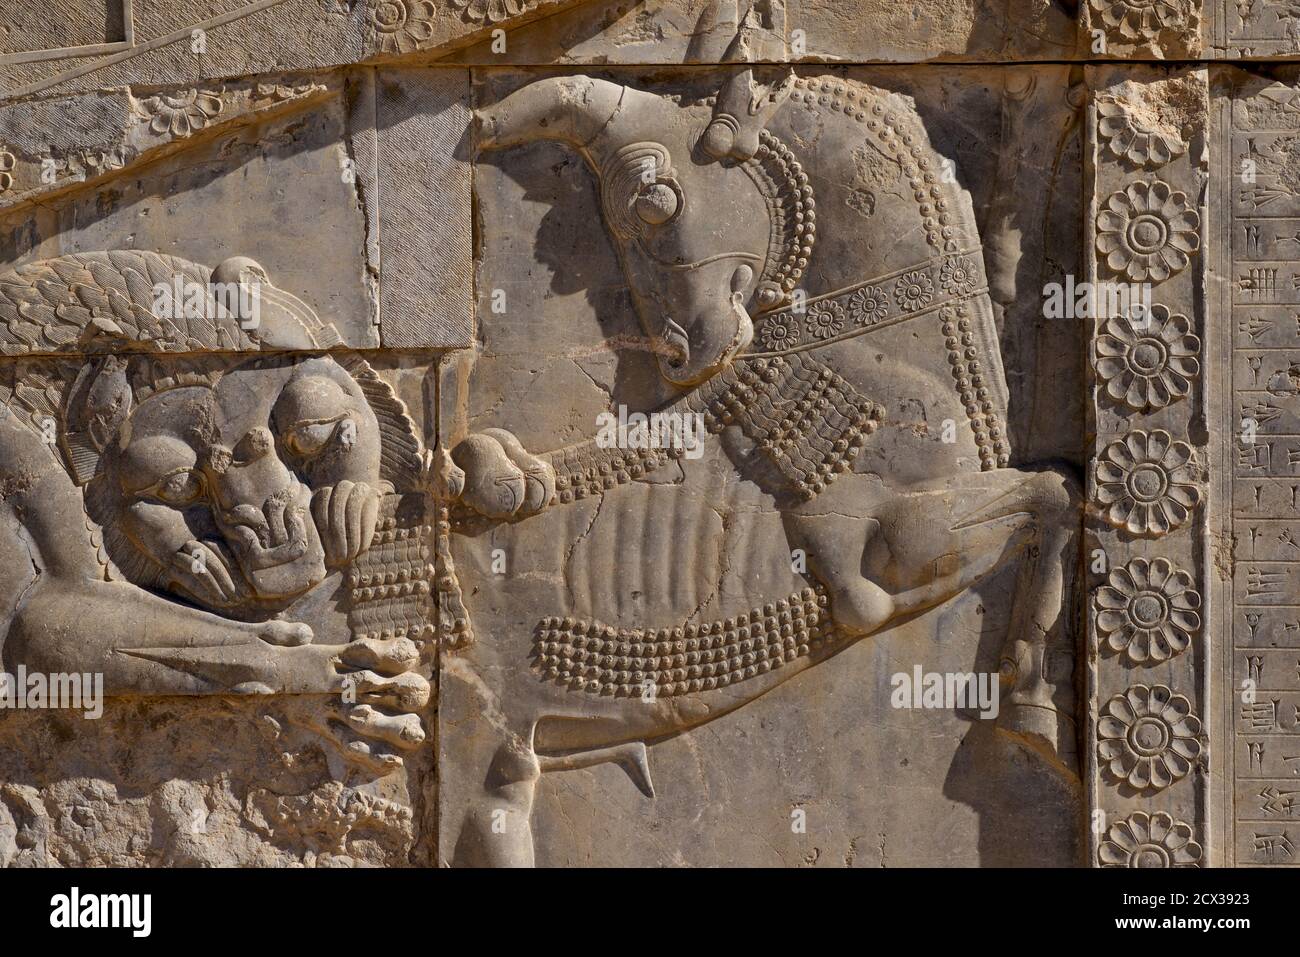 Intricate carving. Palace of Darius the Great, also known as the Tachara, Persepolis, Shiraz, Iran. Lion biting the bull. Relief depicting the symbolic coming of spring and the Nowruz festivity, through lion (sun) feasting on the bull (earth); Persepolis, Iran Stock Photo